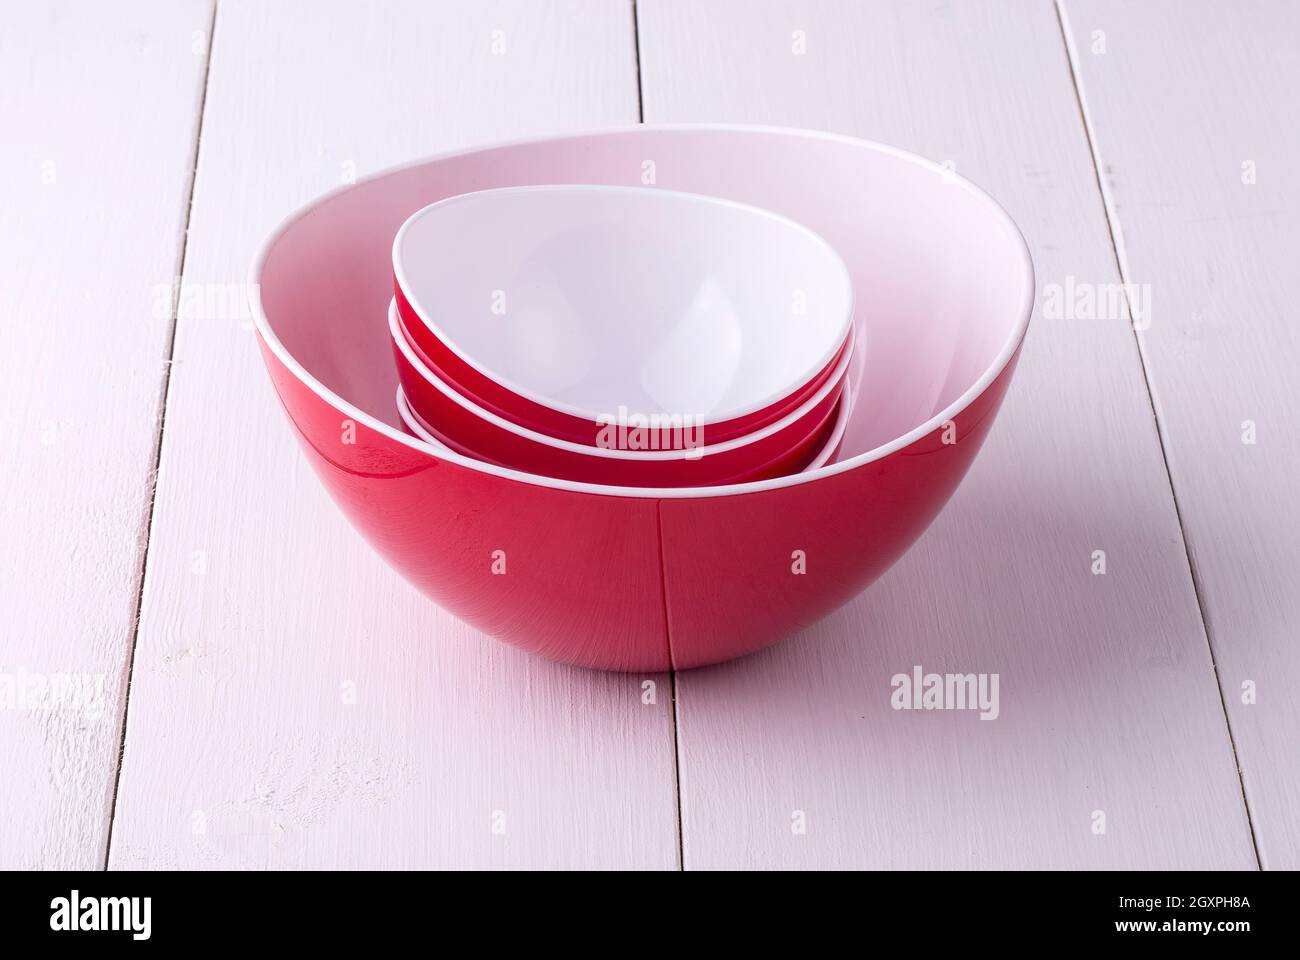 https://c8.alamy.com/comp/2GXPH8A/an-empty-red-salad-bowl-and-cups-on-a-white-wooden-table-2GXPH8A.jpg